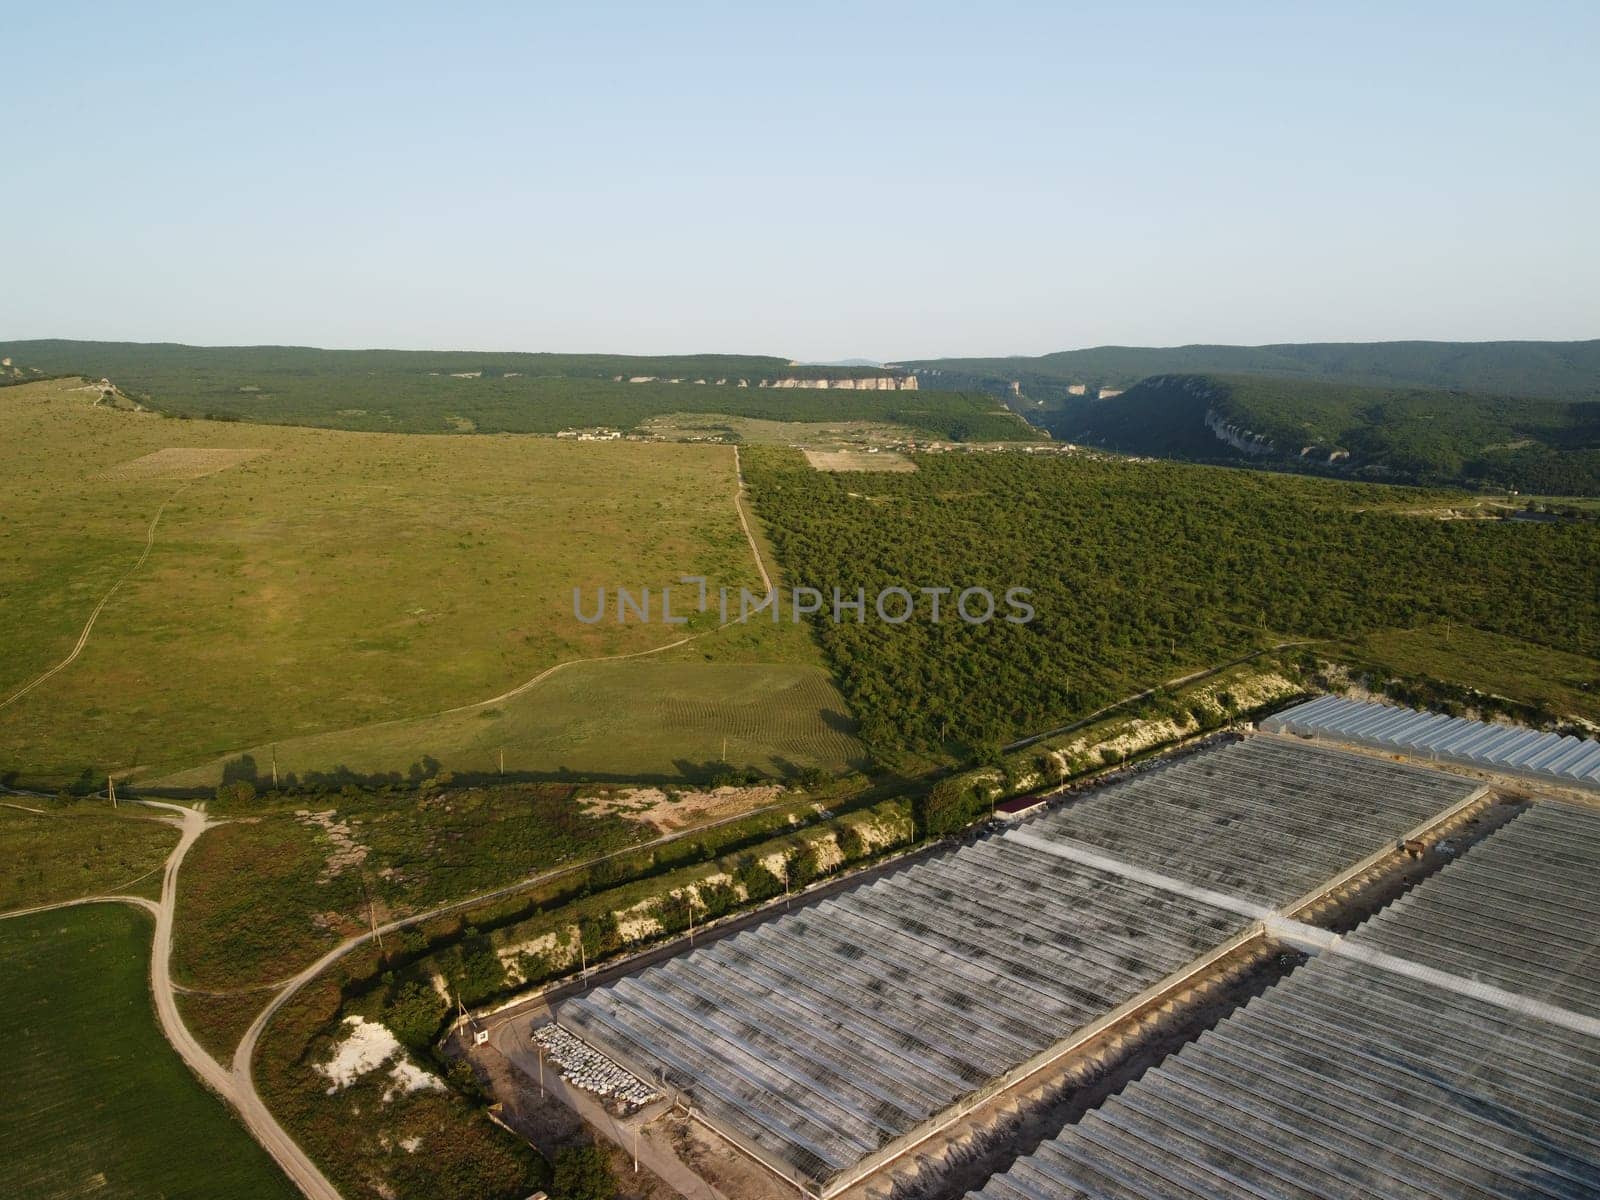 Aerial view on greenhouse factory surrounded by wheat field in countryside. Field of wheat blowing in the wind like green sea. Agronomy, industry and food production. by panophotograph